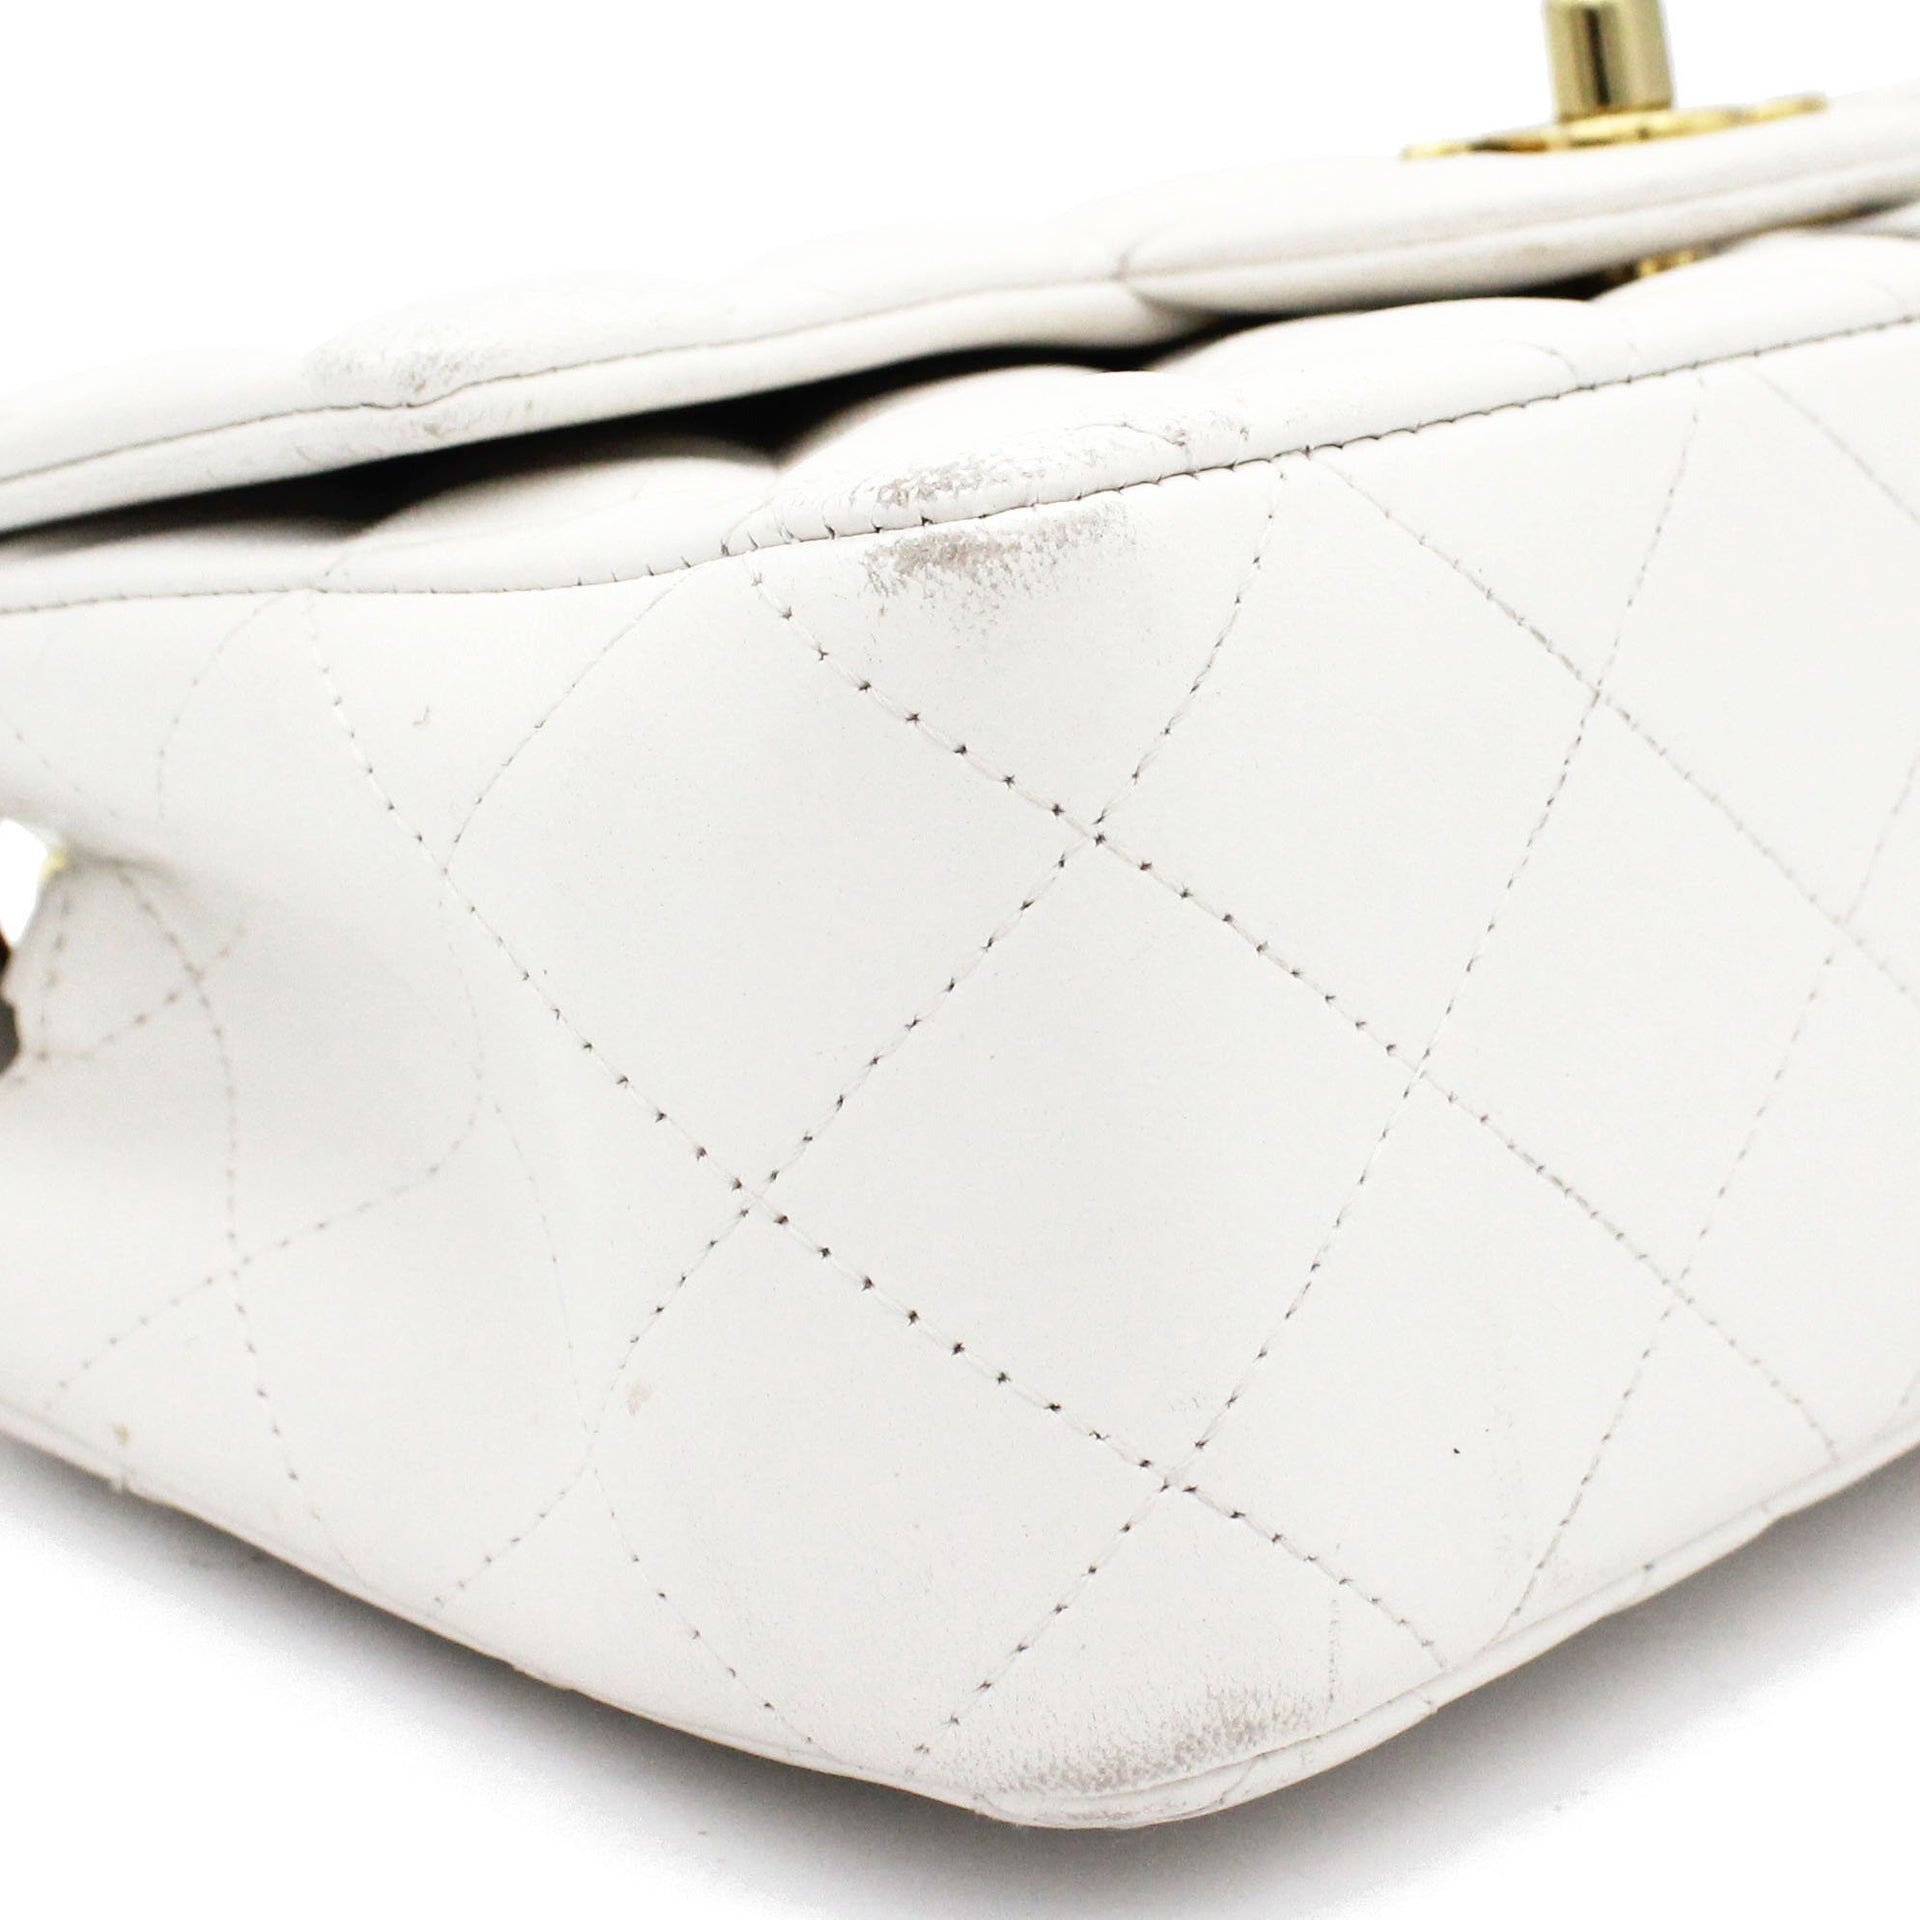 Classic Flap Mini Quilted Lambskin White